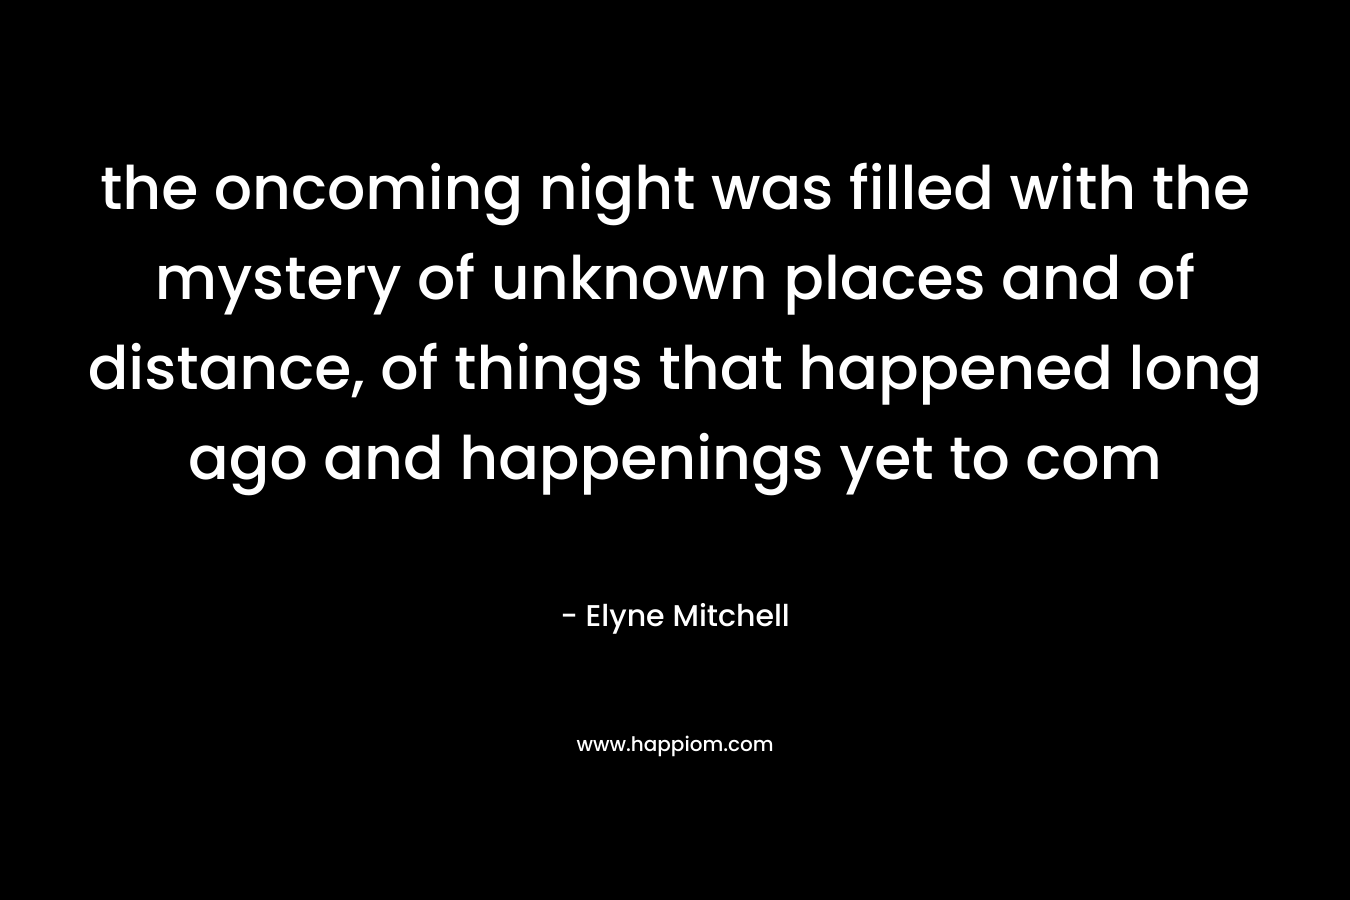 the oncoming night was filled with the mystery of unknown places and of distance, of things that happened long ago and happenings yet to com